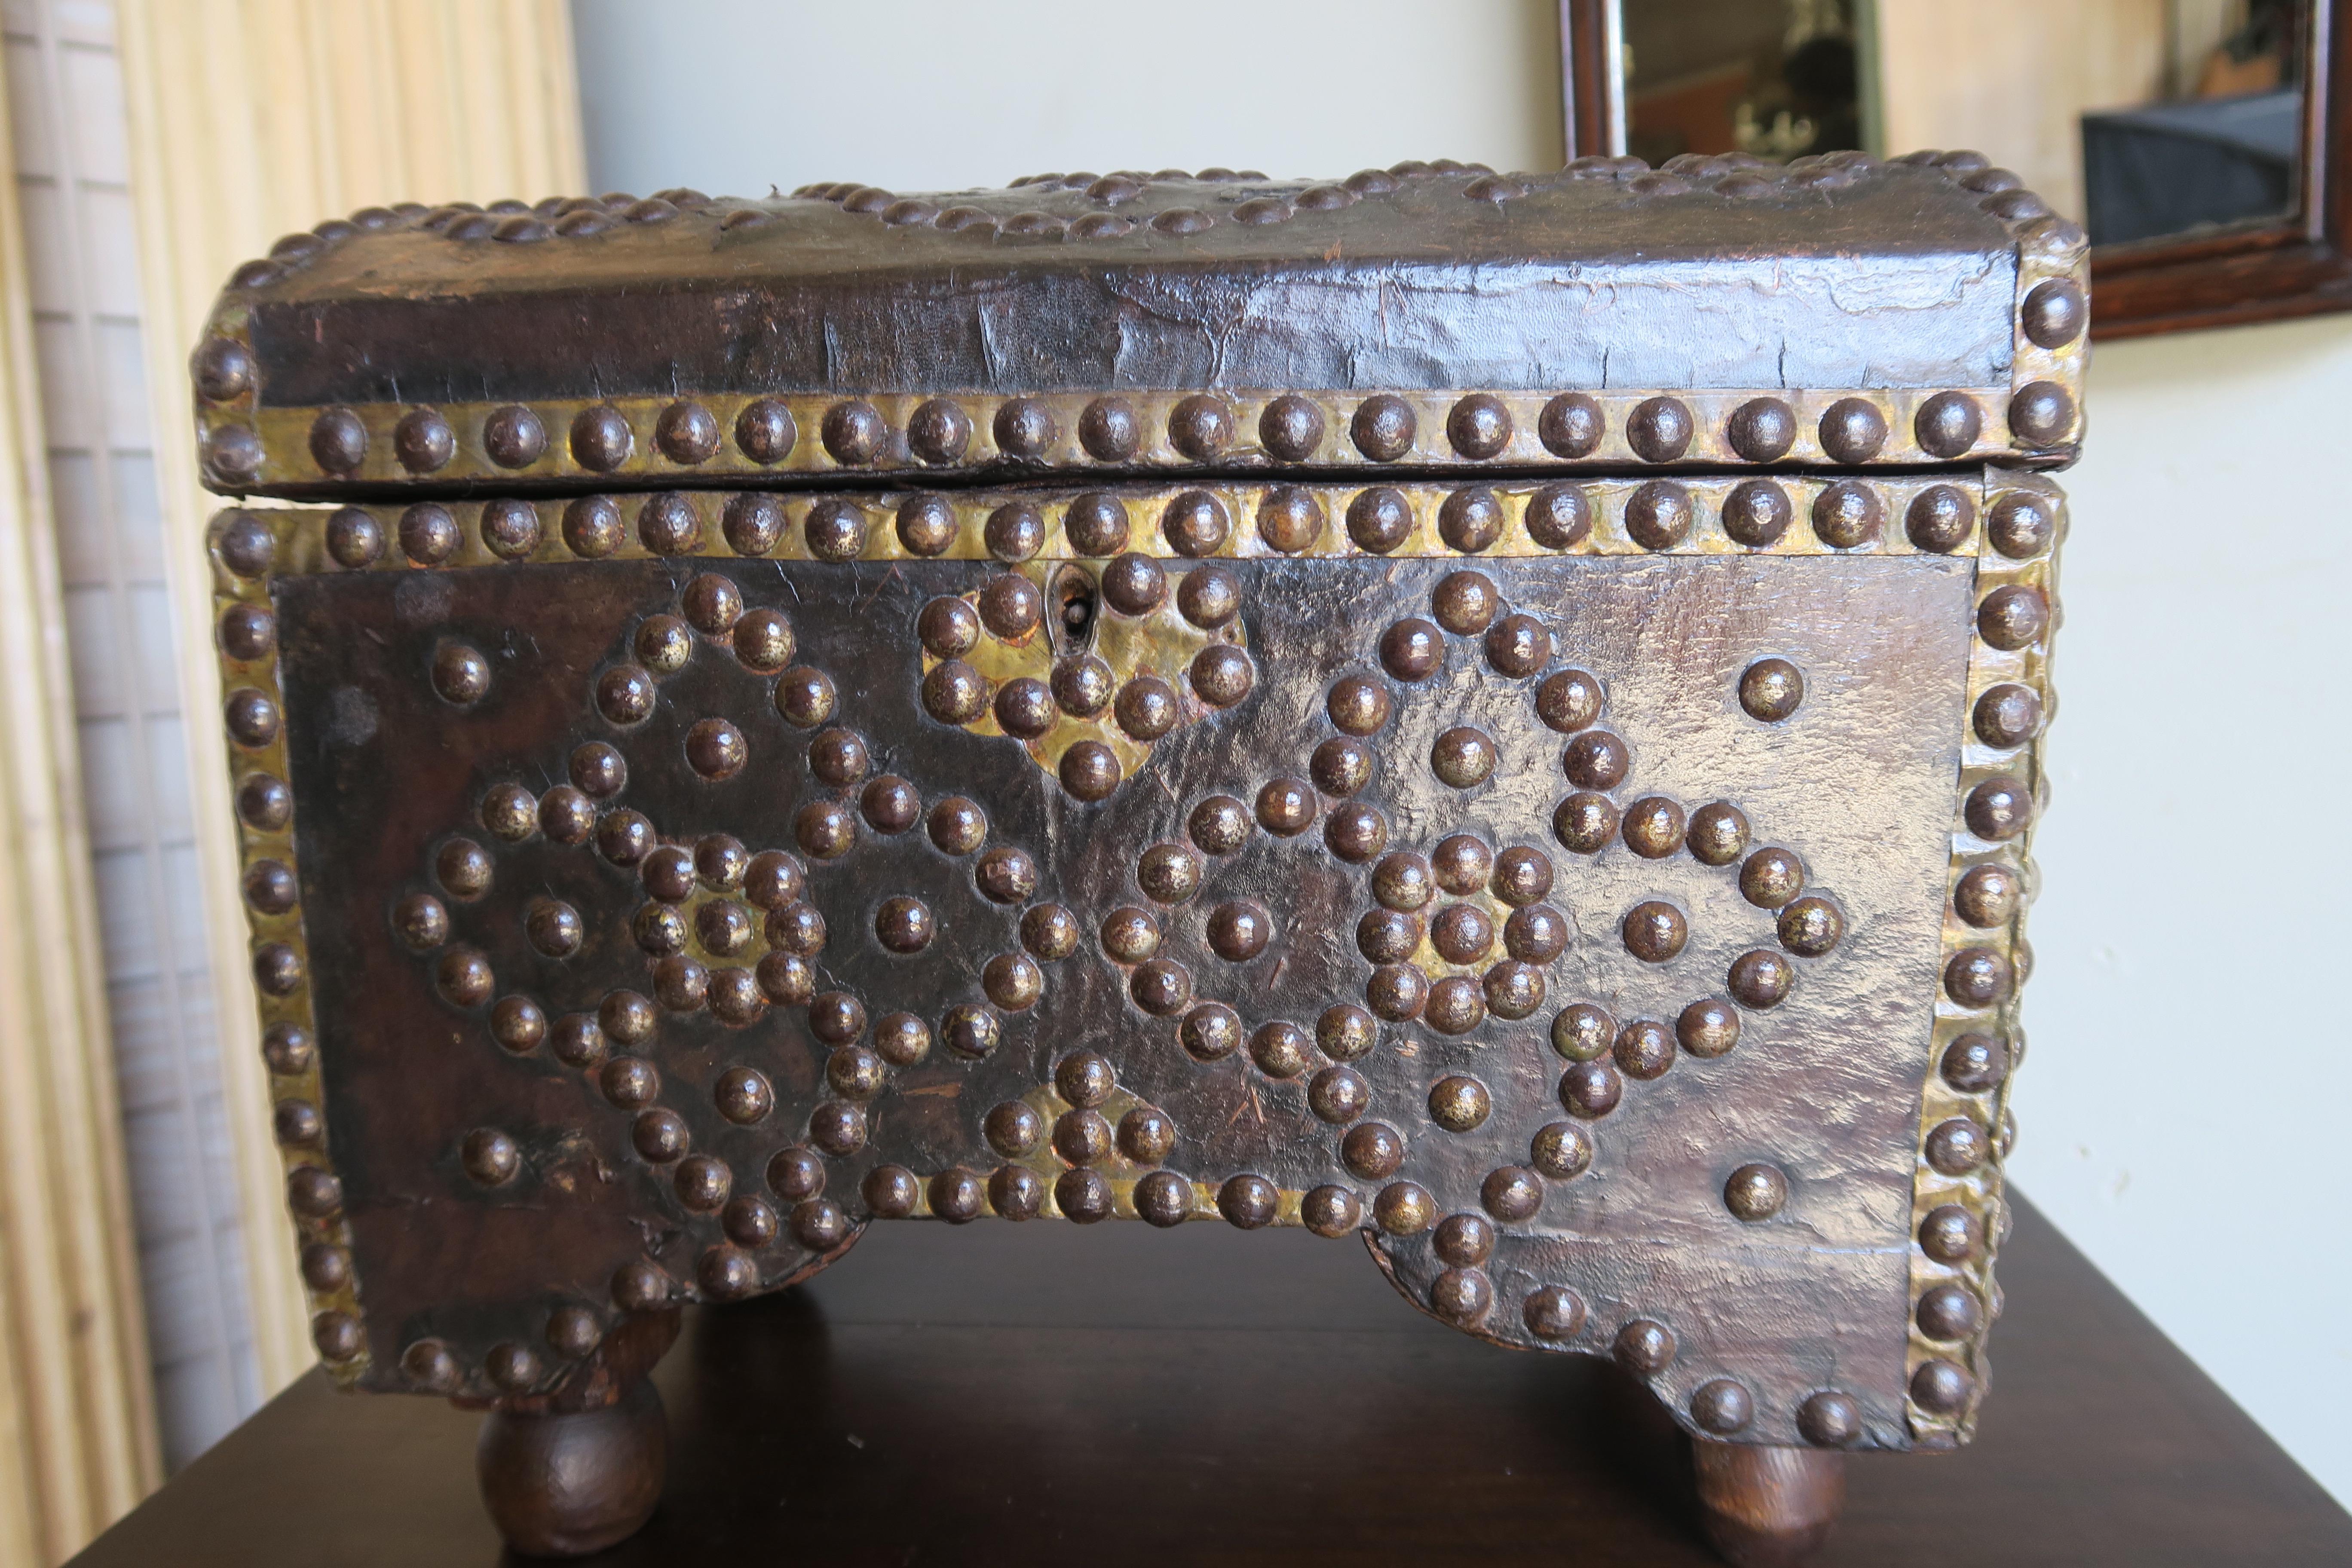 19th century Spanish leather domed shaped box with studded detailing throughout.